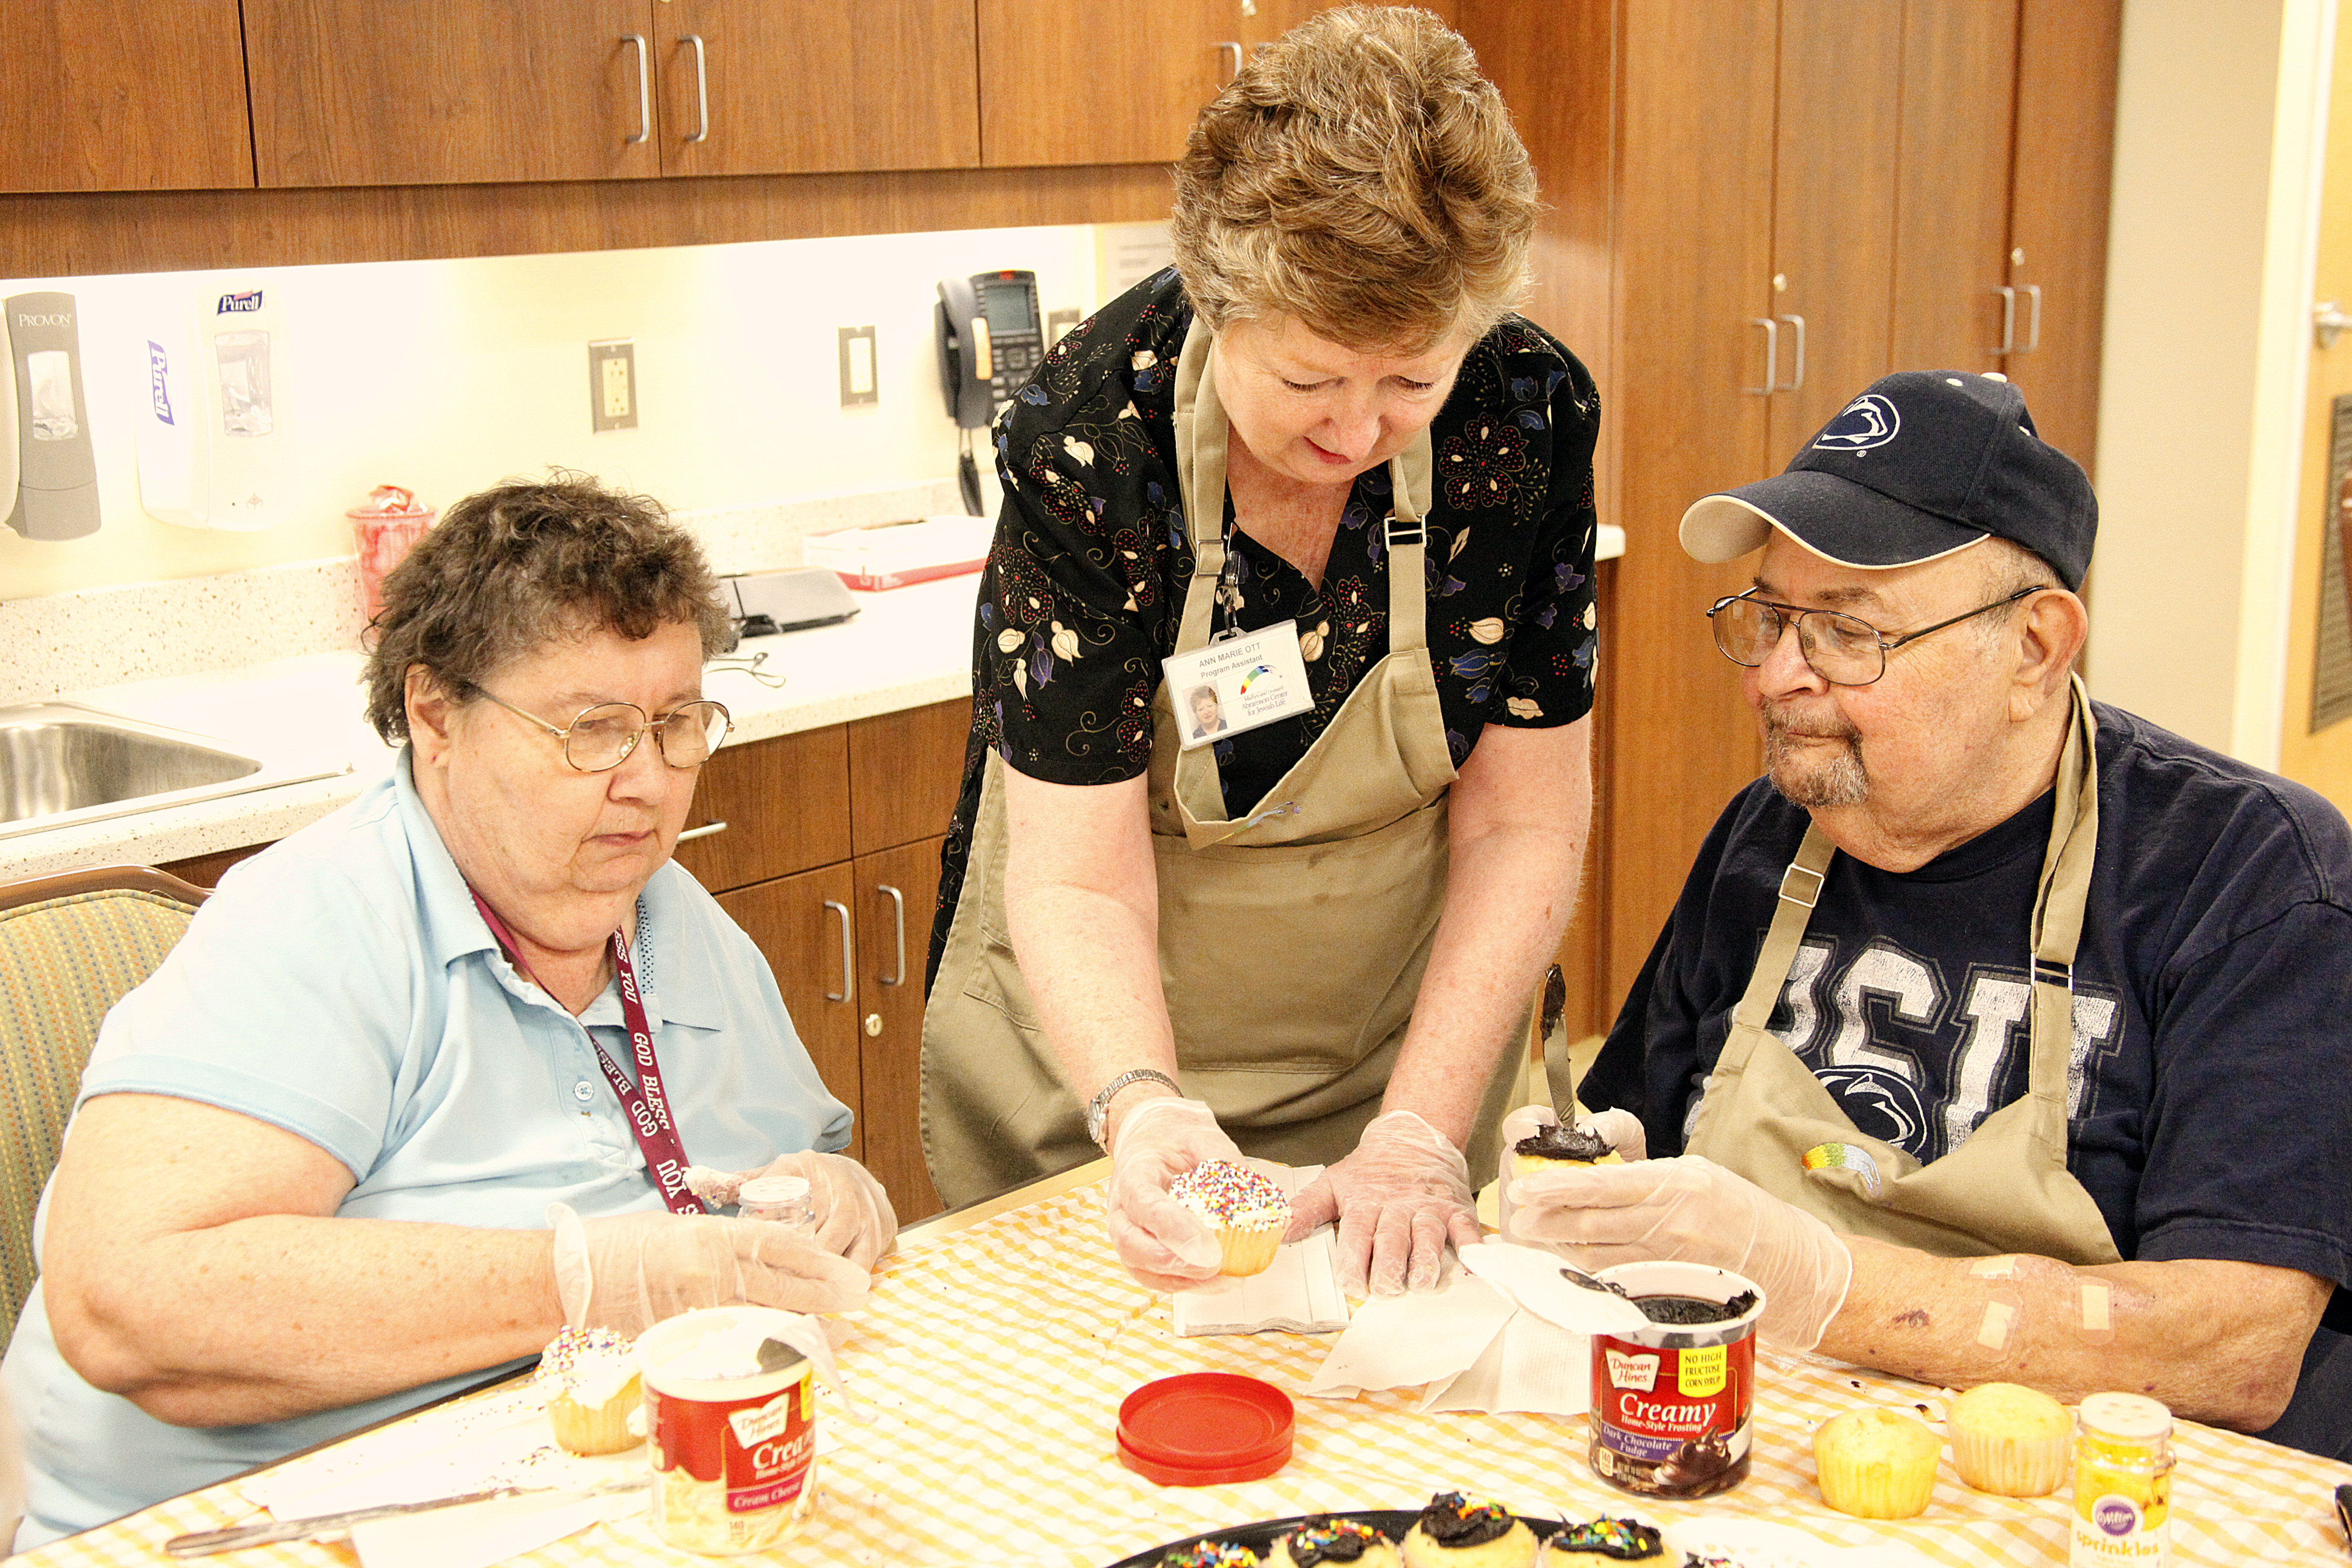 Medical Adult Day Services Provide Support to Age in Place